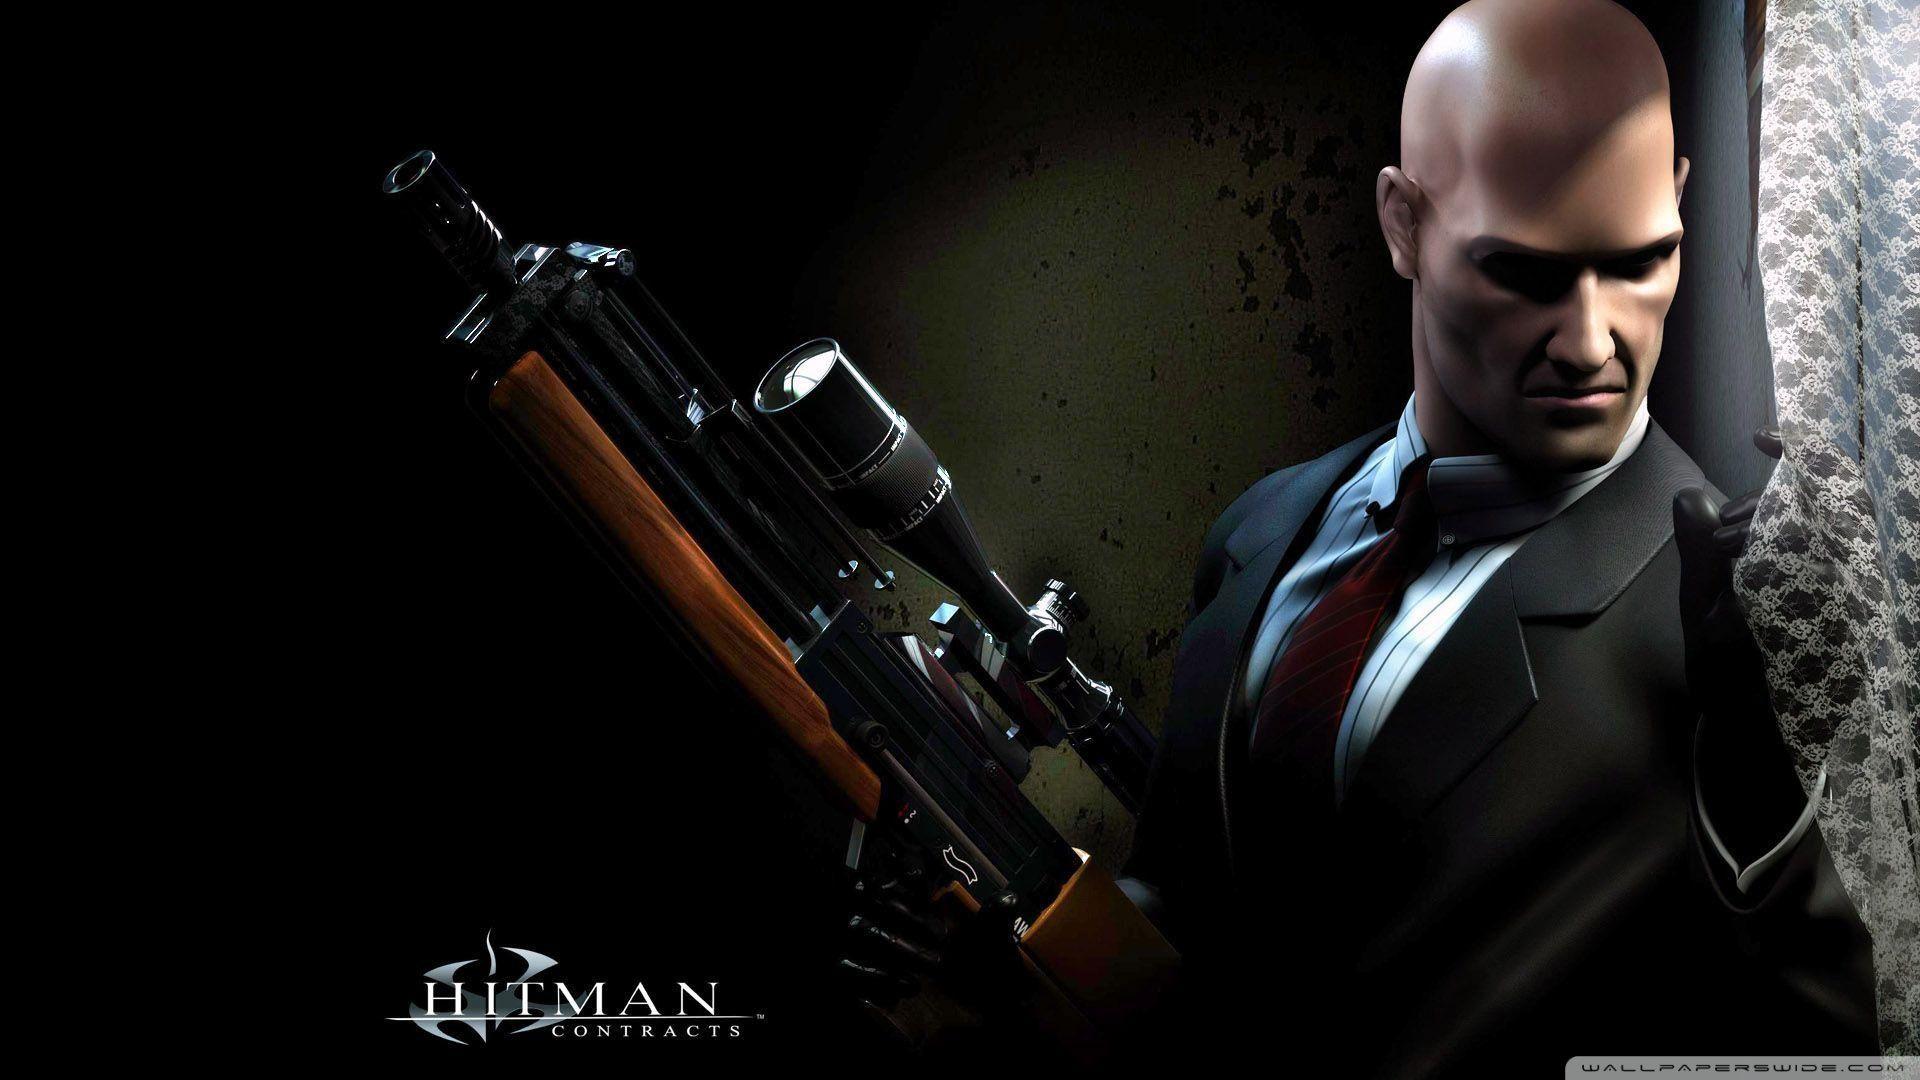 Hitman Absolution Wallpapers 1920x1080 - Wallpaper Cave